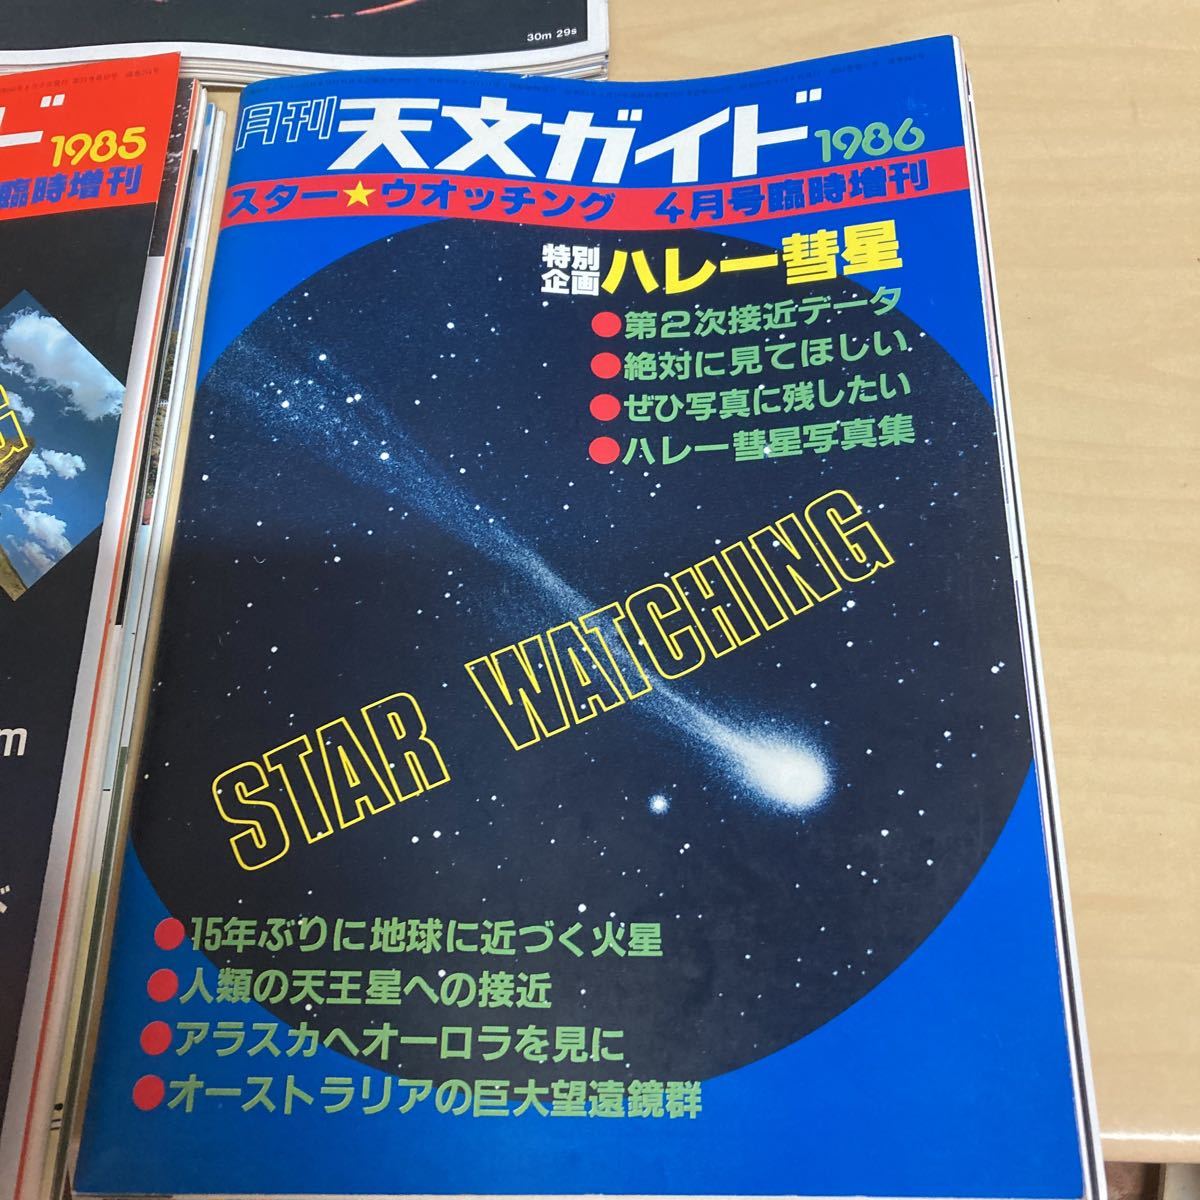  monthly astronomy guide 3 pcs. set 